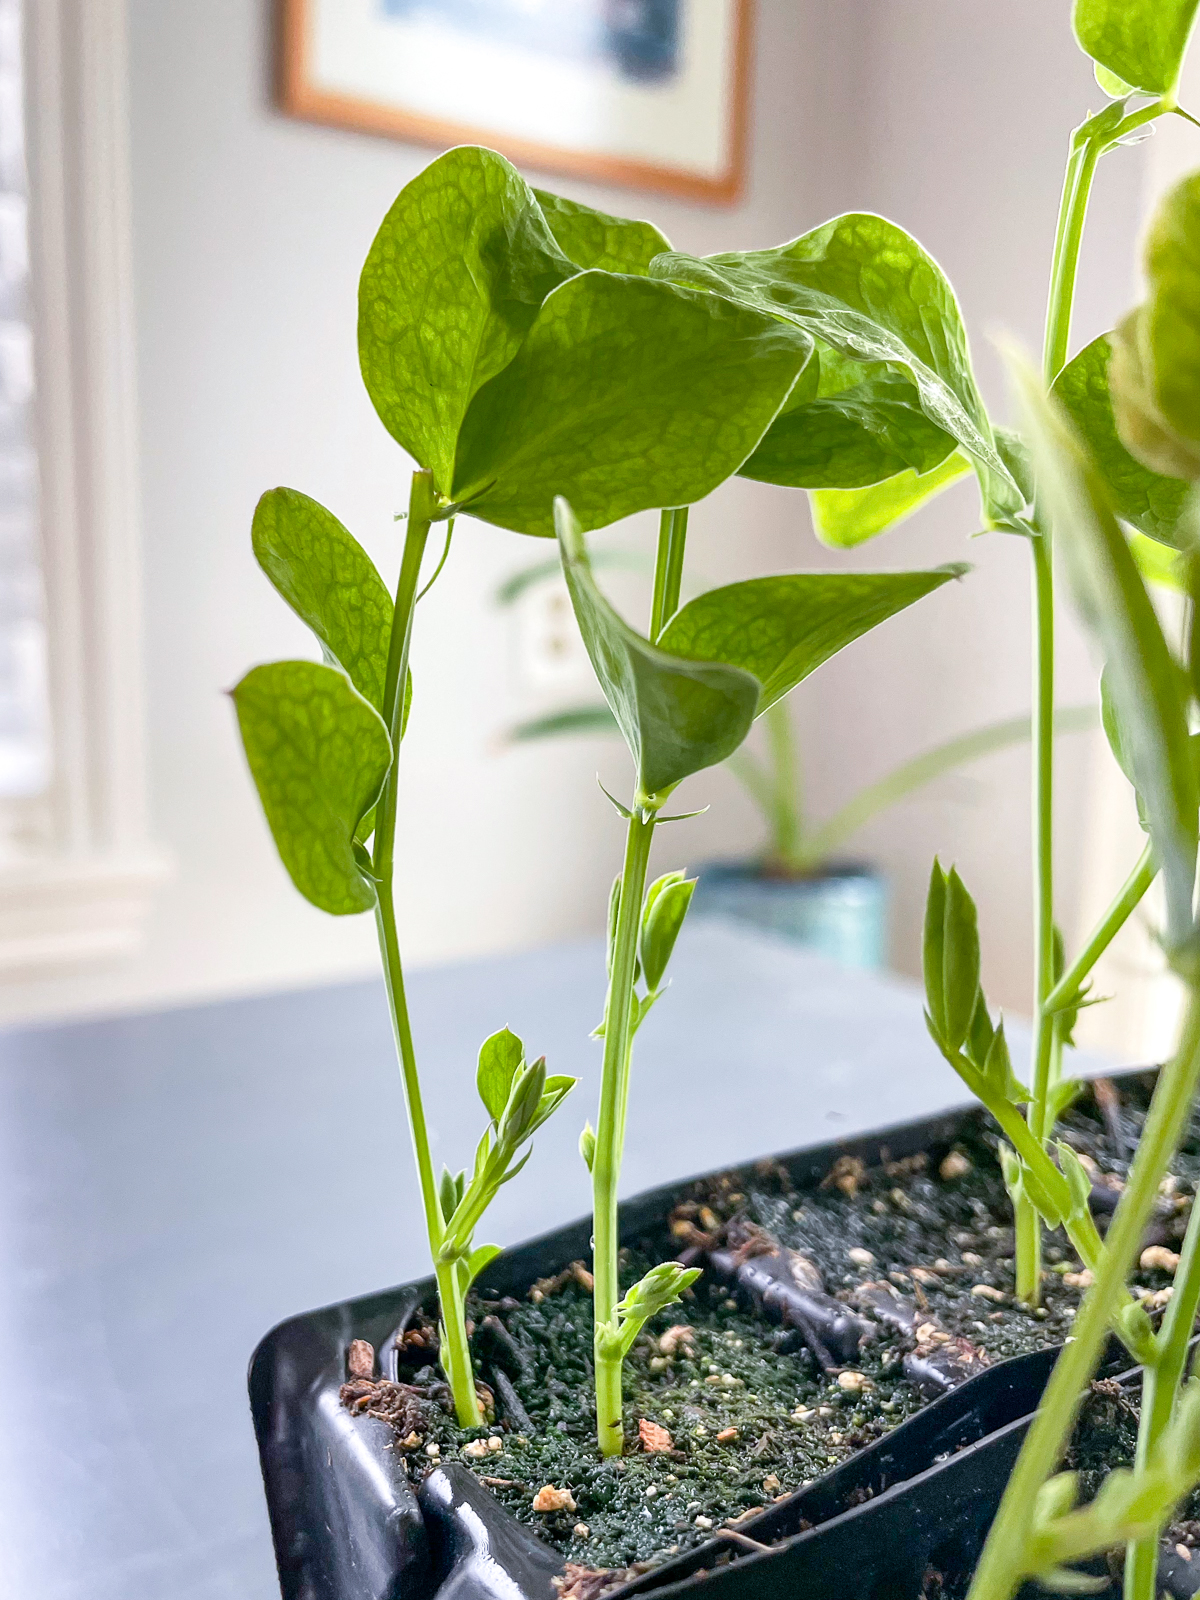 sweet pea seedlings with branching stems after pinching the tops